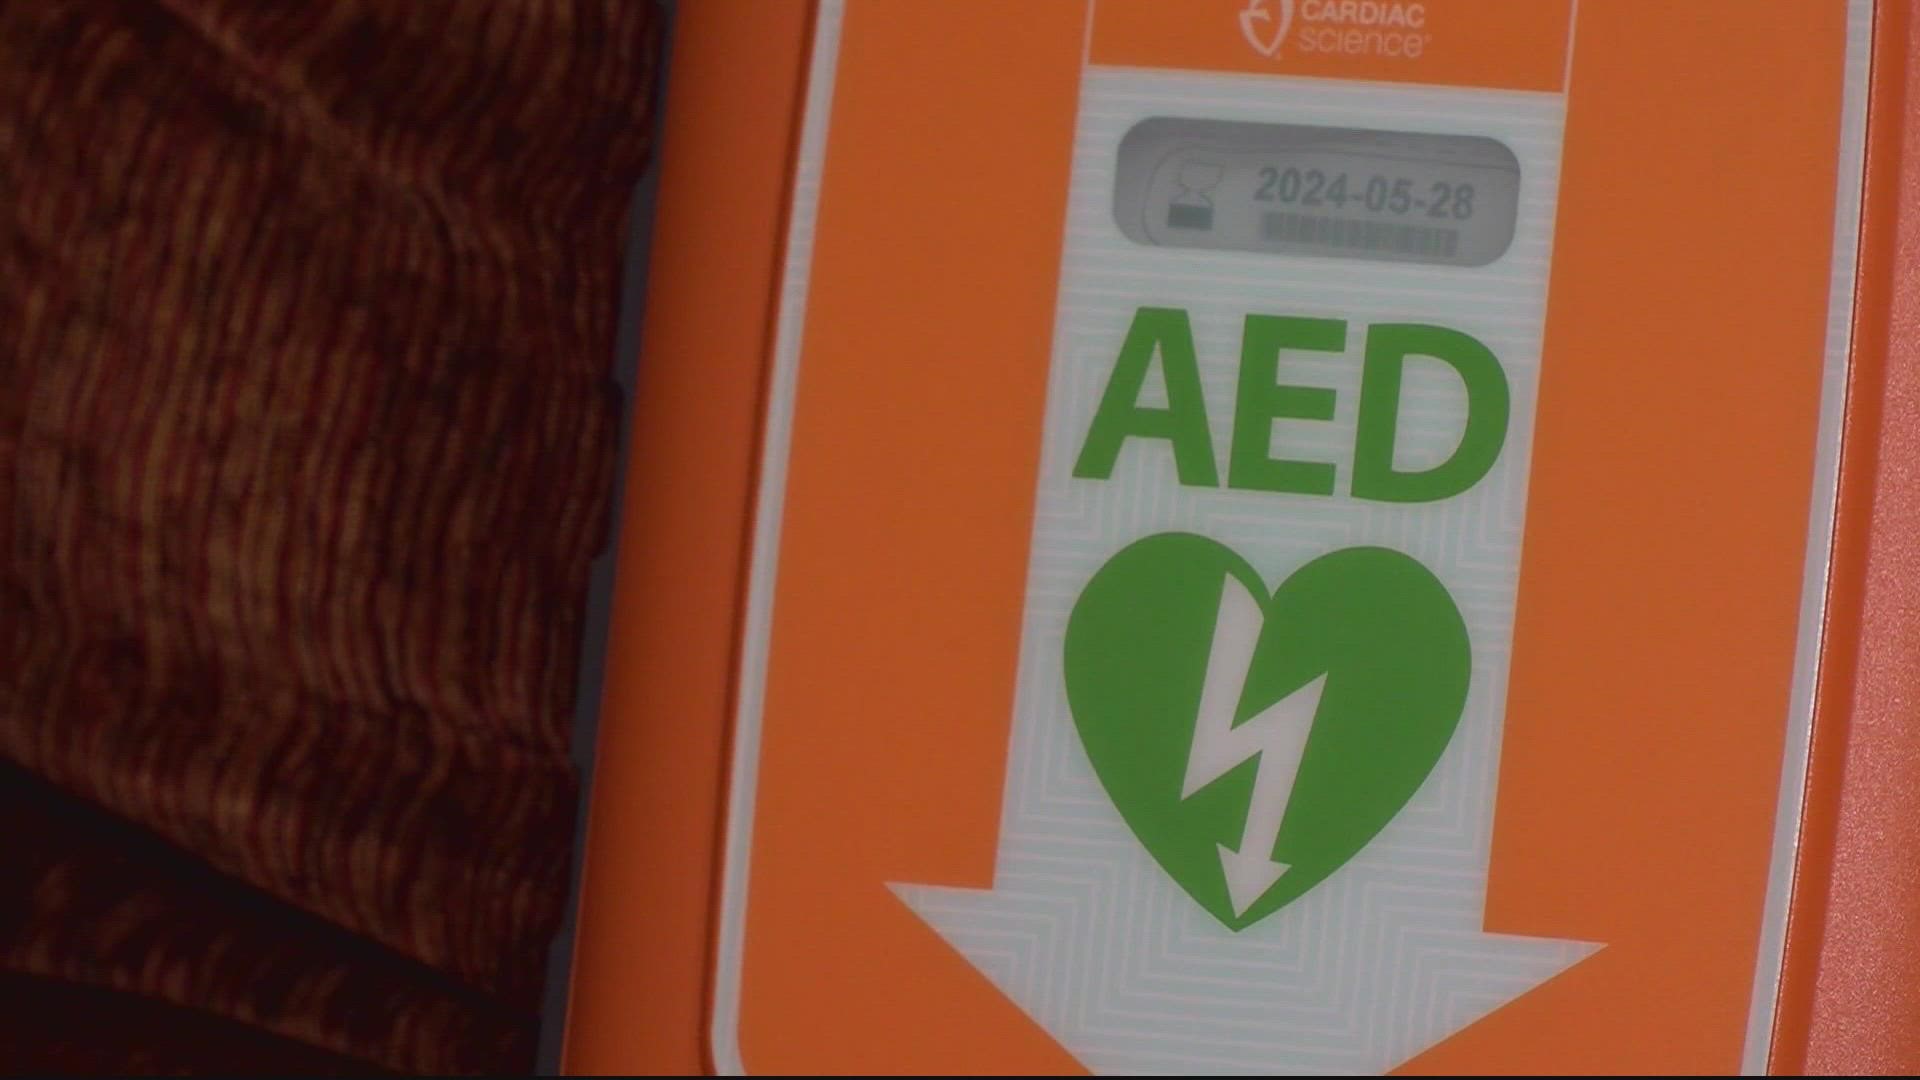 In the hours since Damar Hamlin’s collapse, people across the country have praised the use of AEDs in emergency situations.